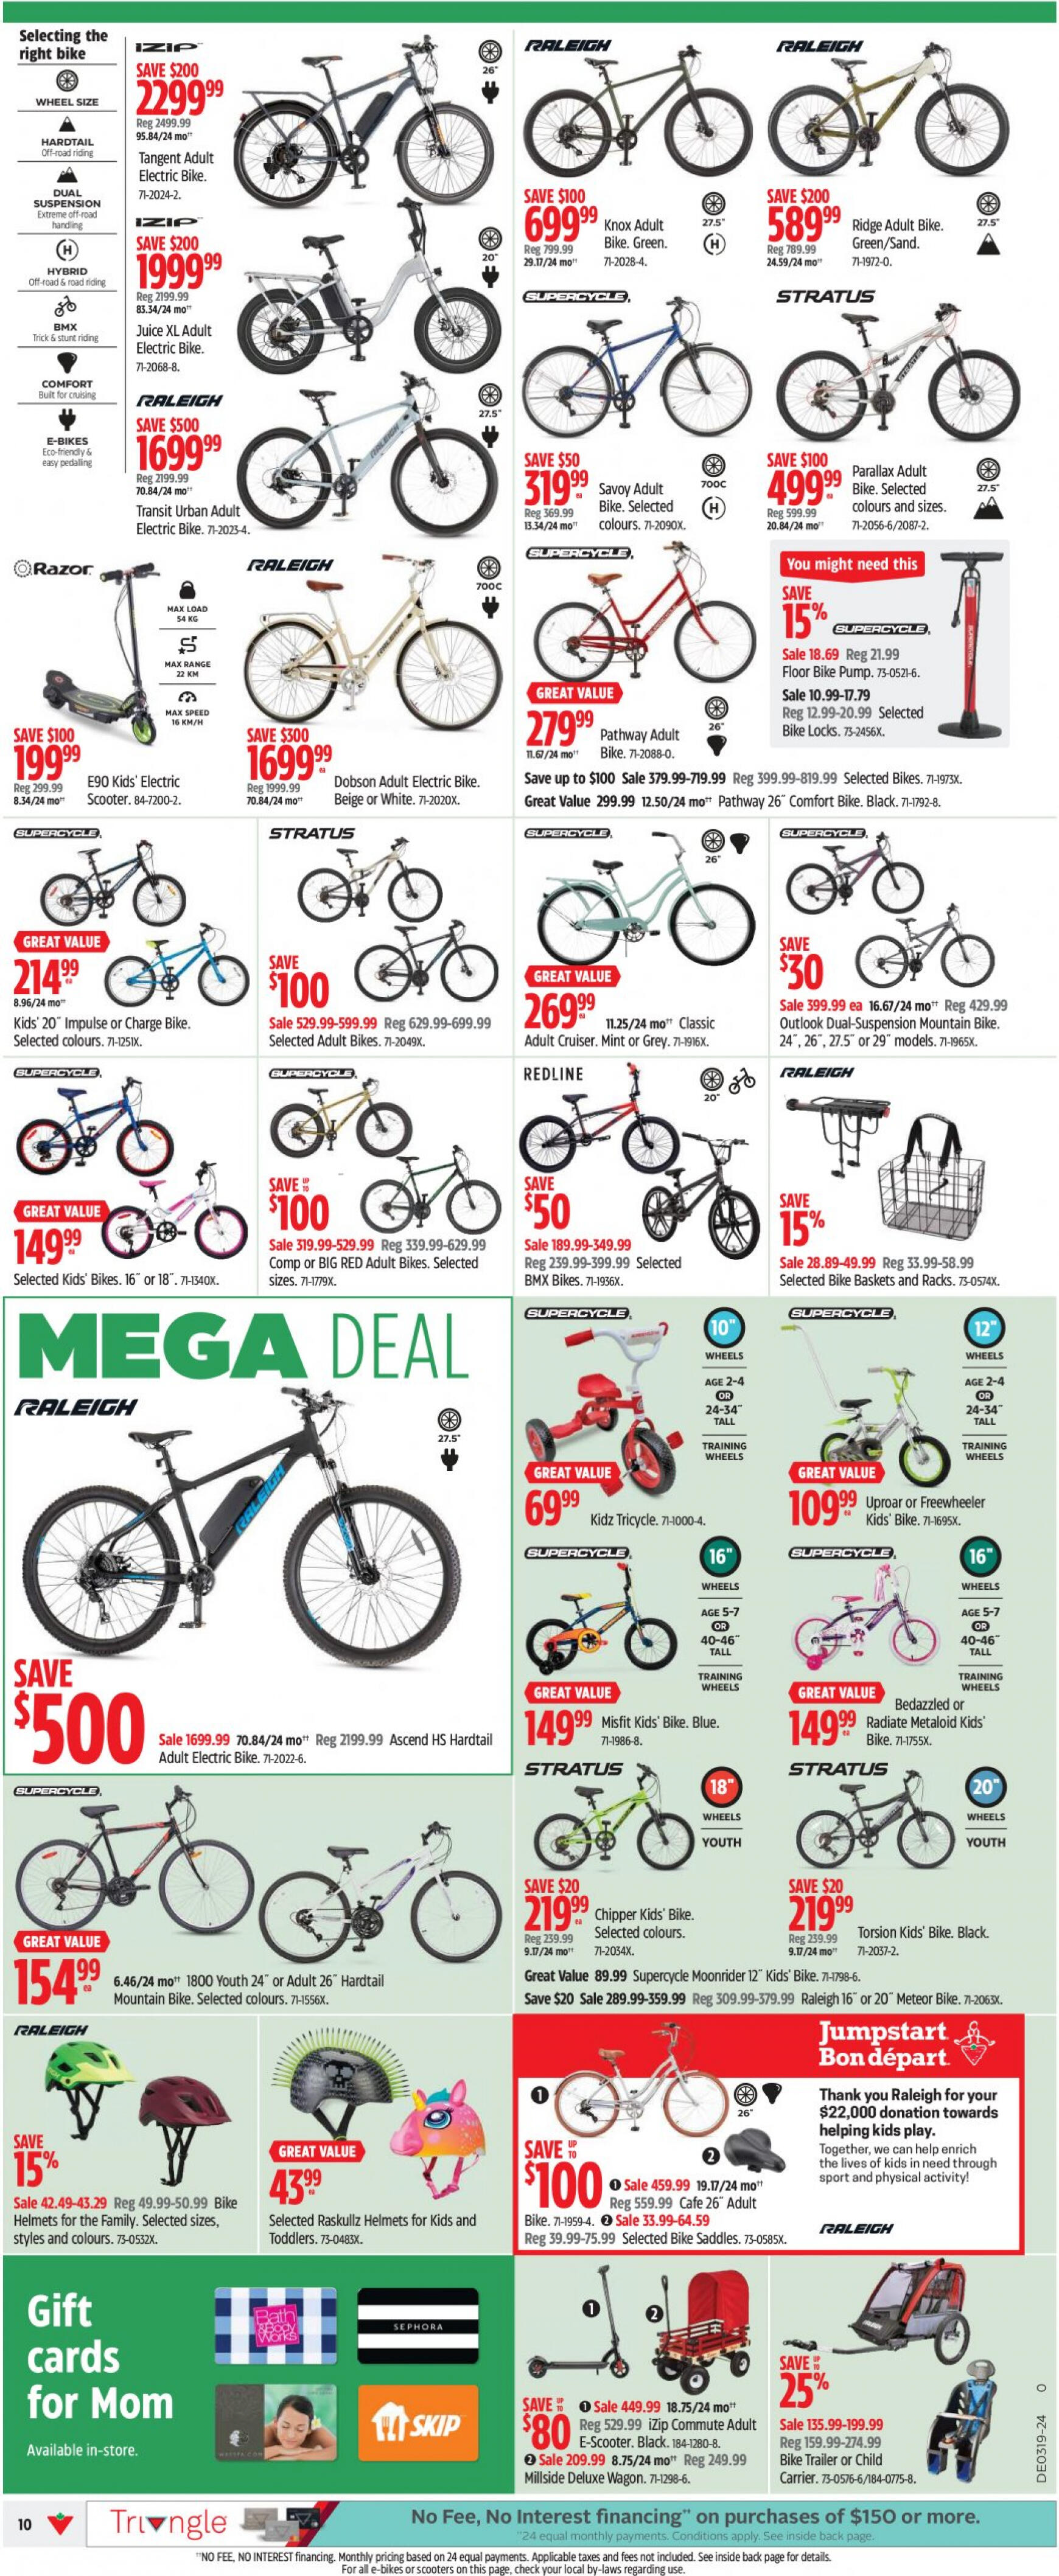 canadian-tire - Canadian Tire flyer current 02.05. - 08.05. - page: 9